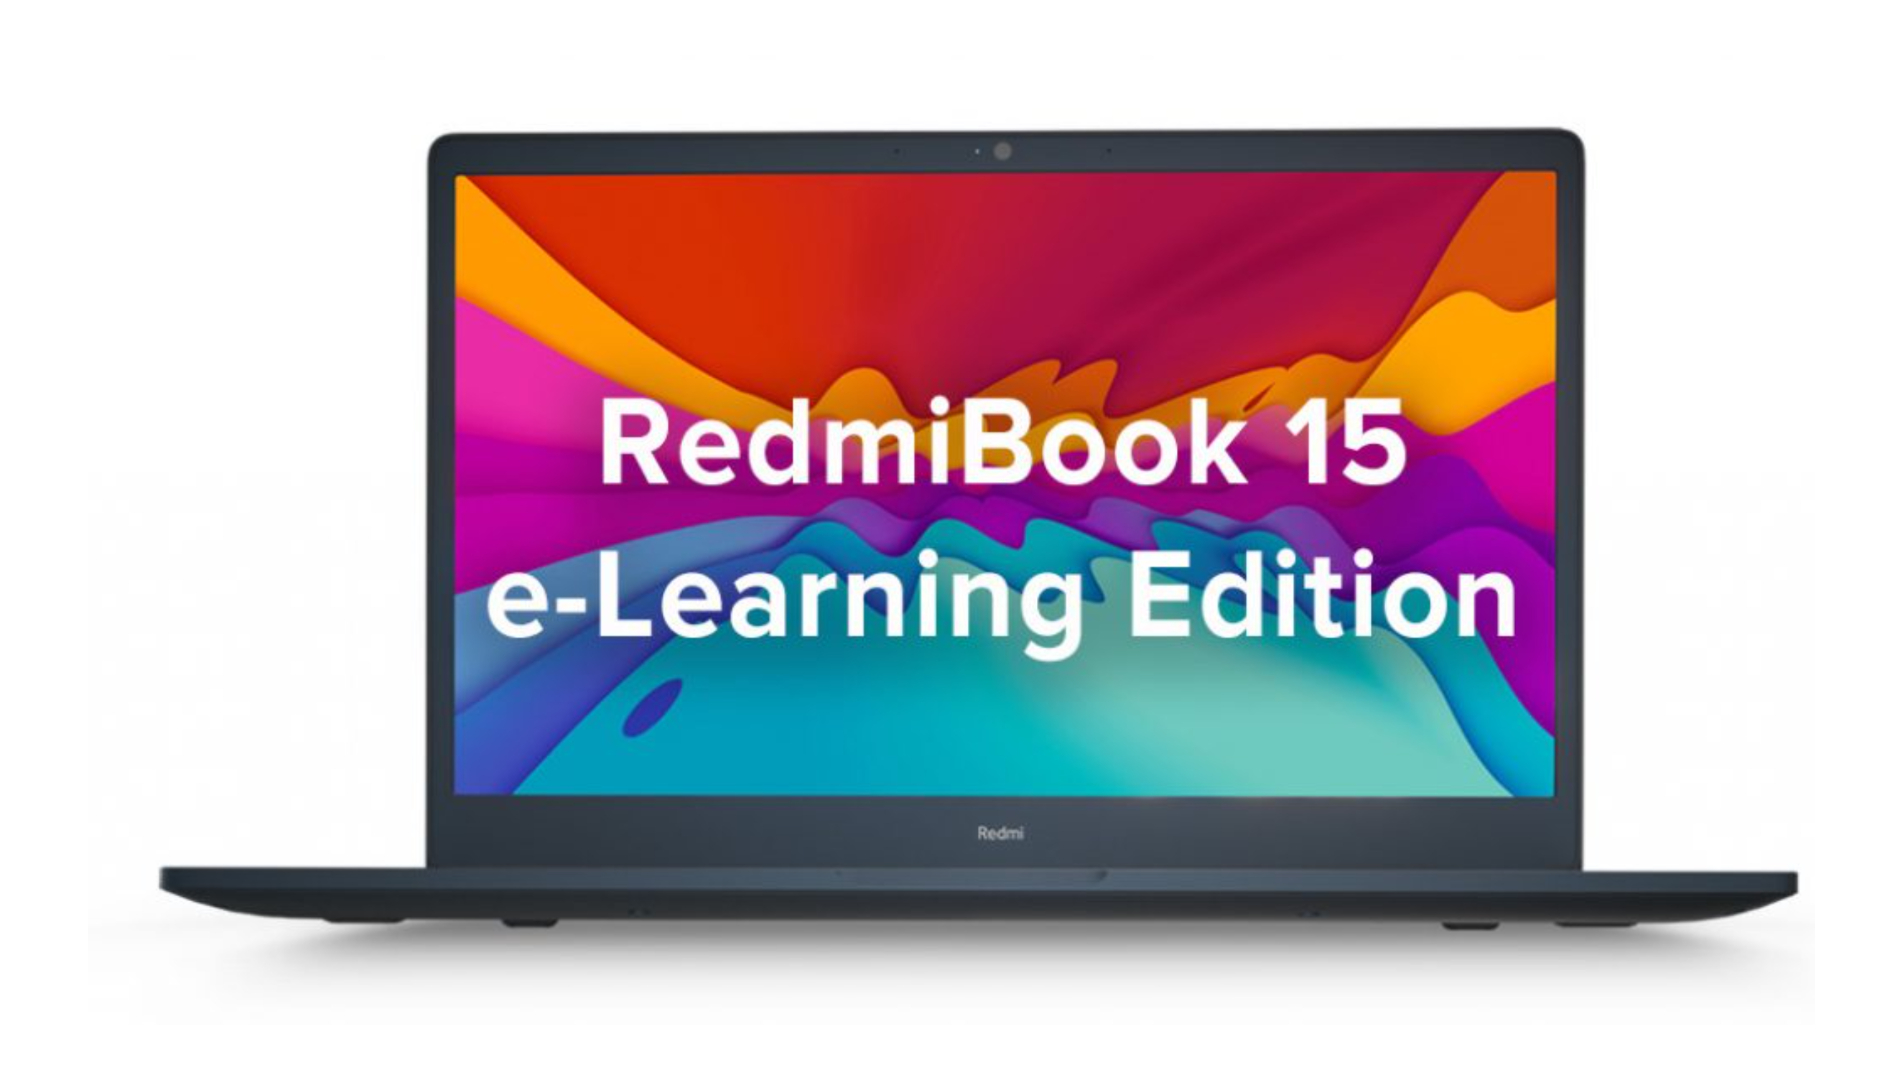 Xiaomi RedmiBook 15 e-Learning Edition, RedmiBook 15 Pro Laptops With